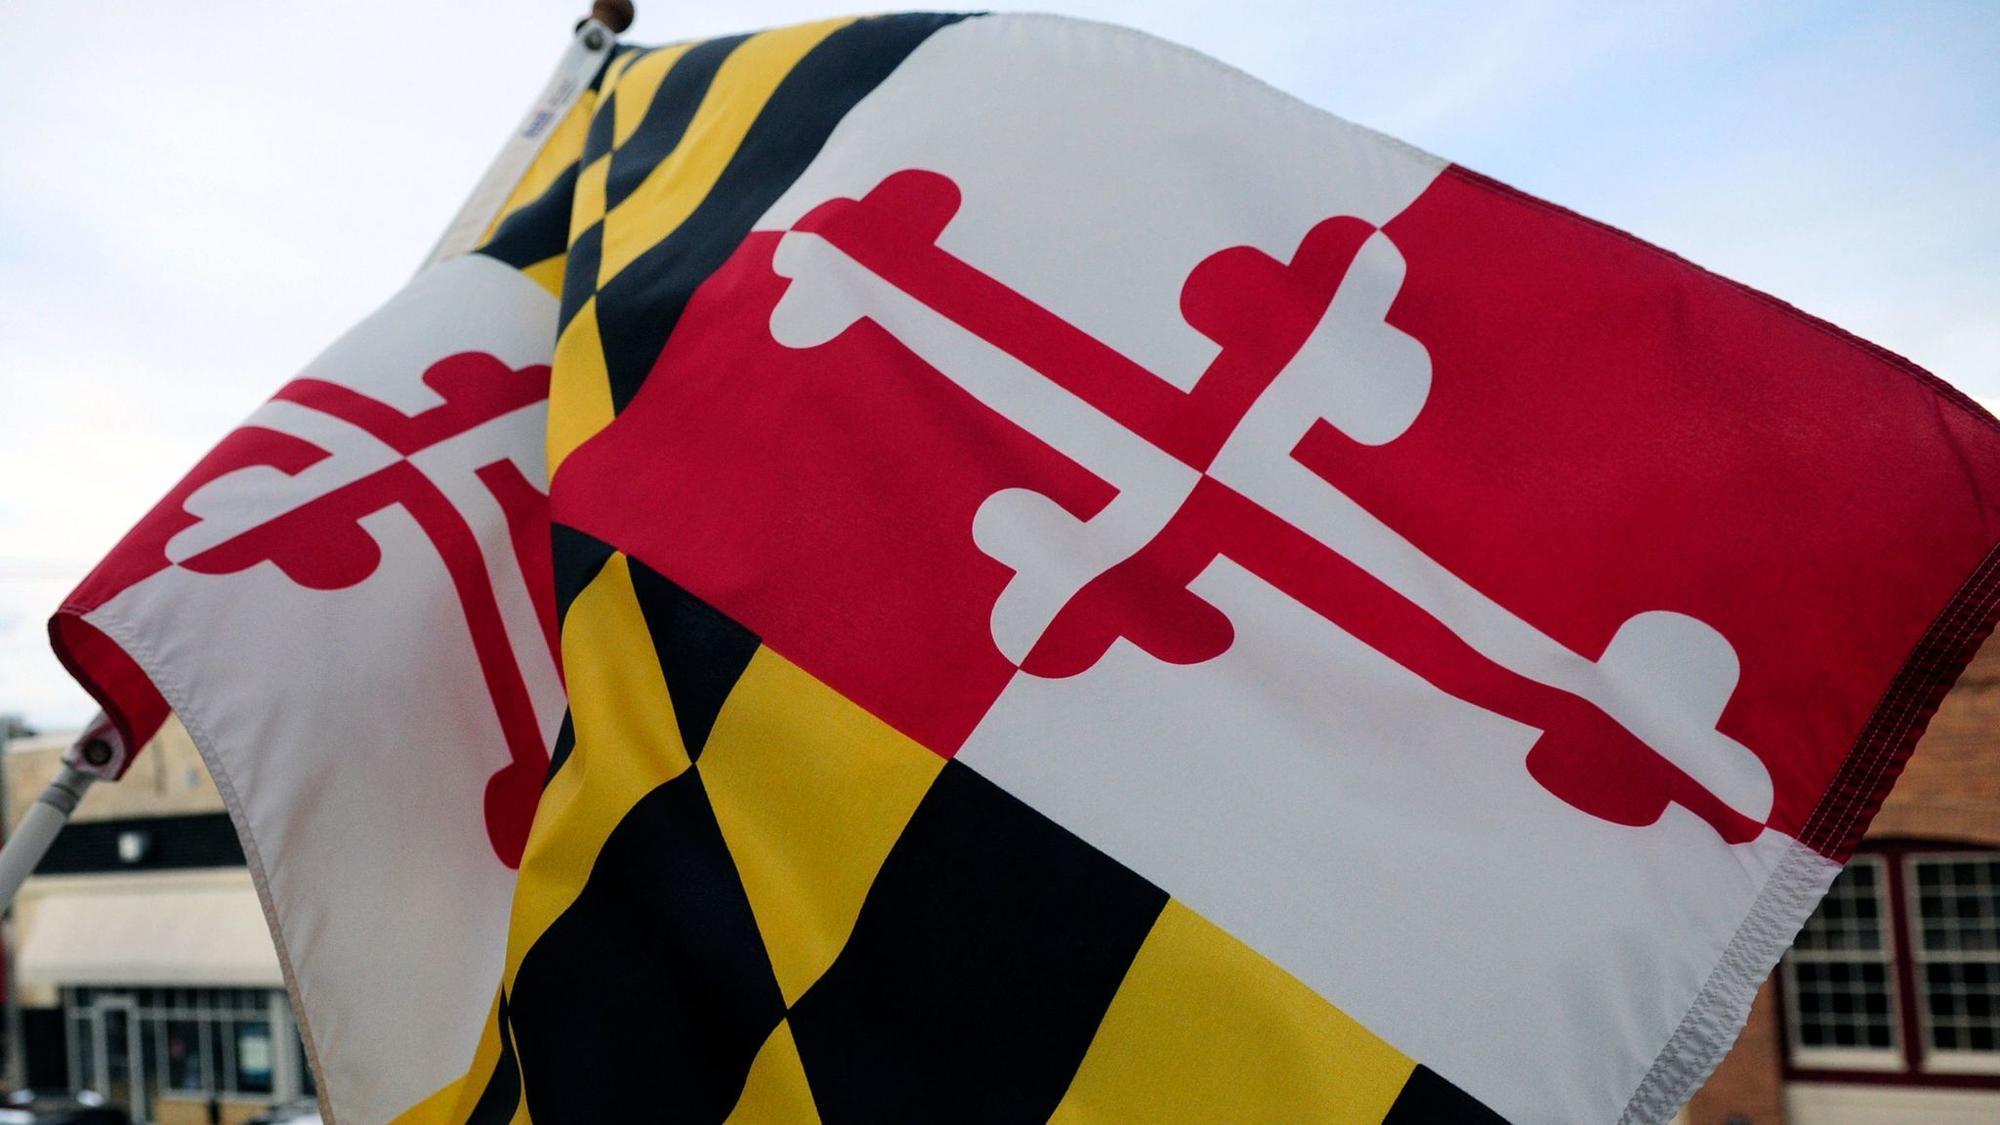 Maryland unemployment rate stays steady in October - Baltimore Sun